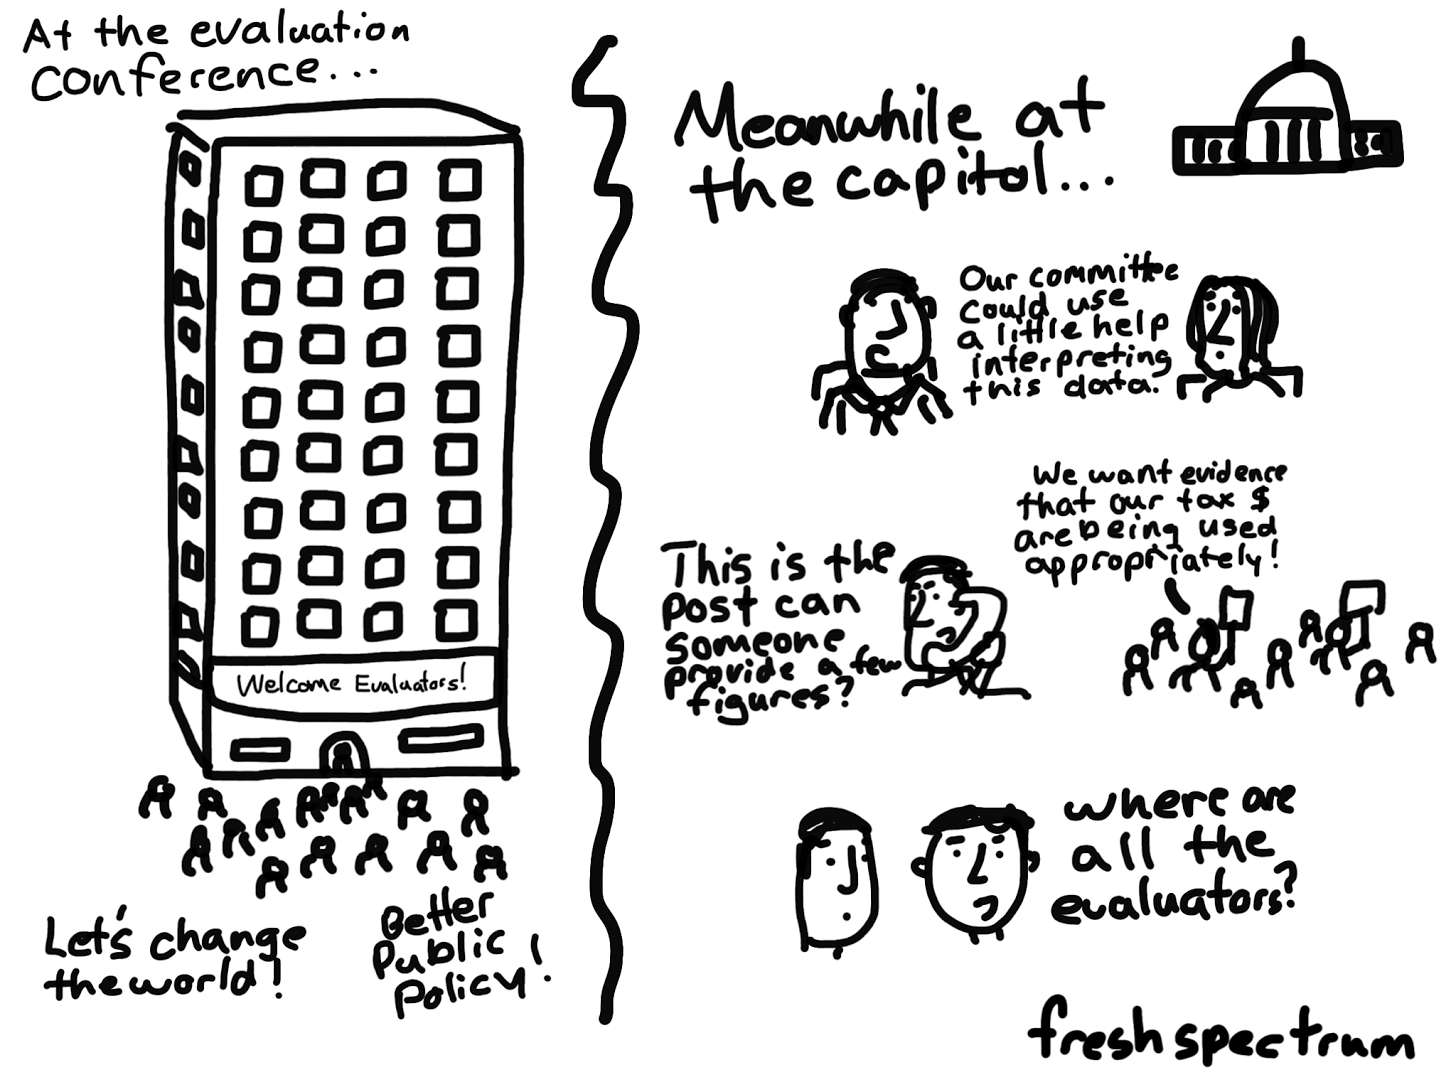 Cartoon-At the evaluation conference....meanwhile at the capitol where are the evaluators.